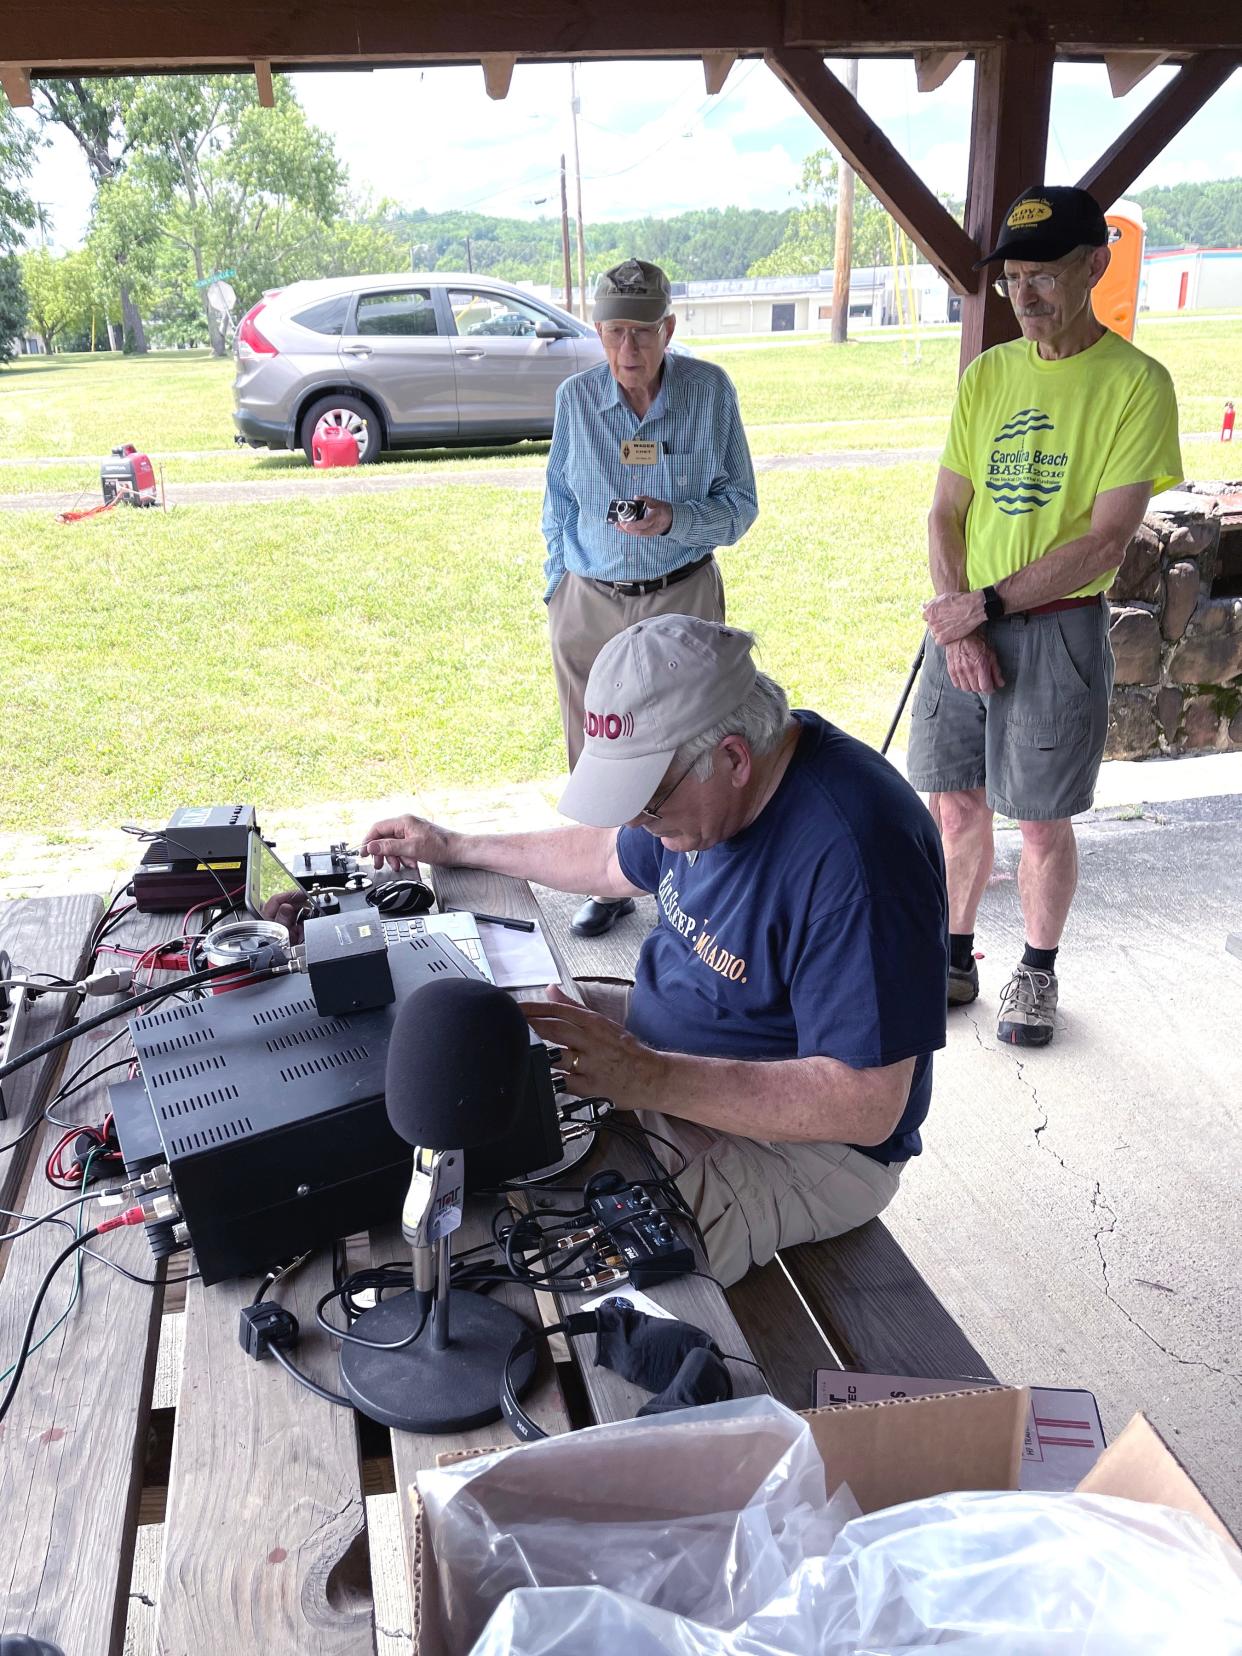 Jim Bogard of the ORARC demonstrates his expertise at the CW station during ARRL Field Day 2021 as fellow hams observe.